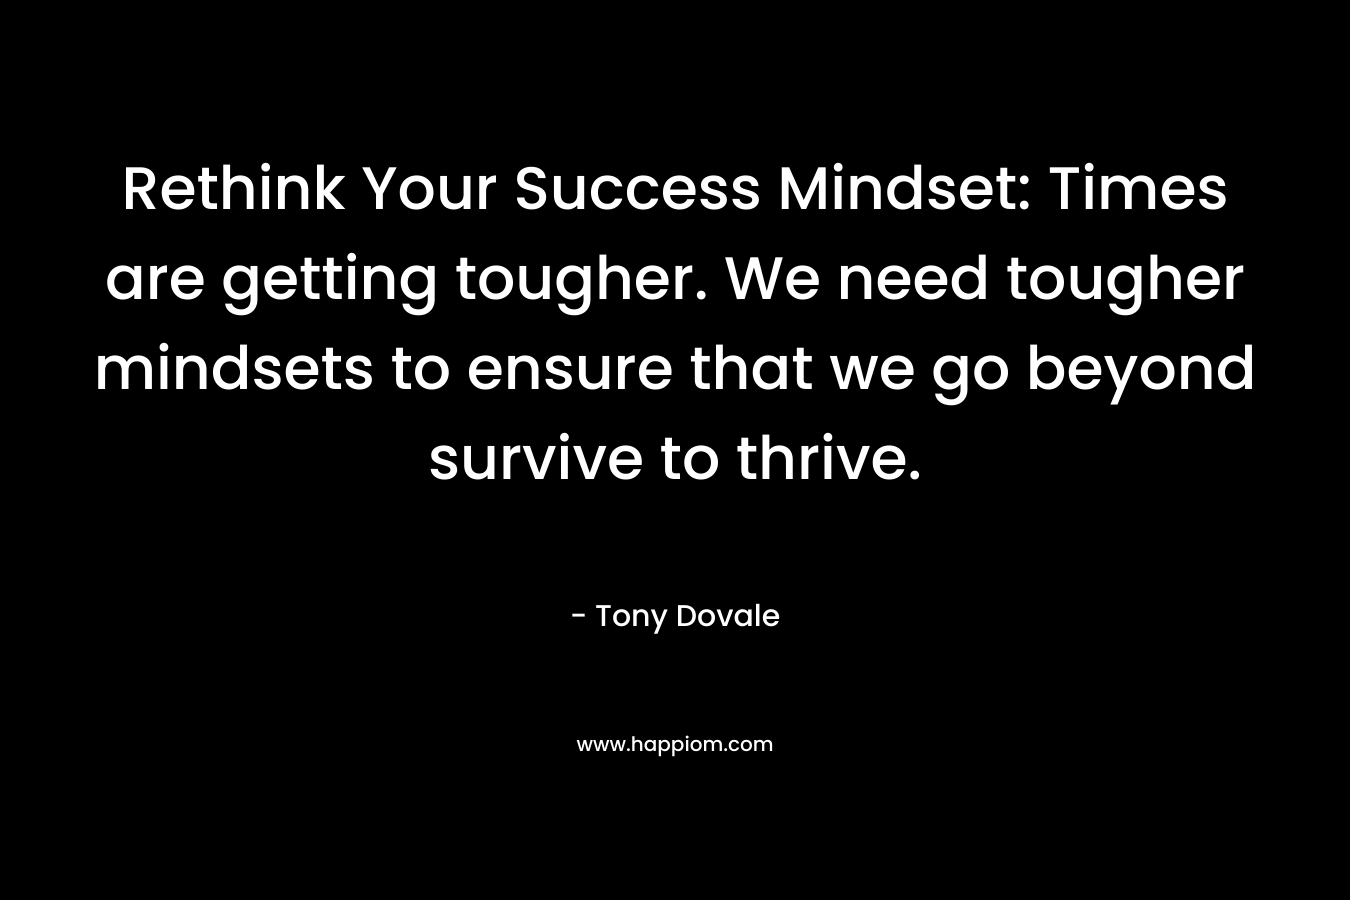 Rethink Your Success Mindset: Times are getting tougher. We need tougher mindsets to ensure that we go beyond survive to thrive.